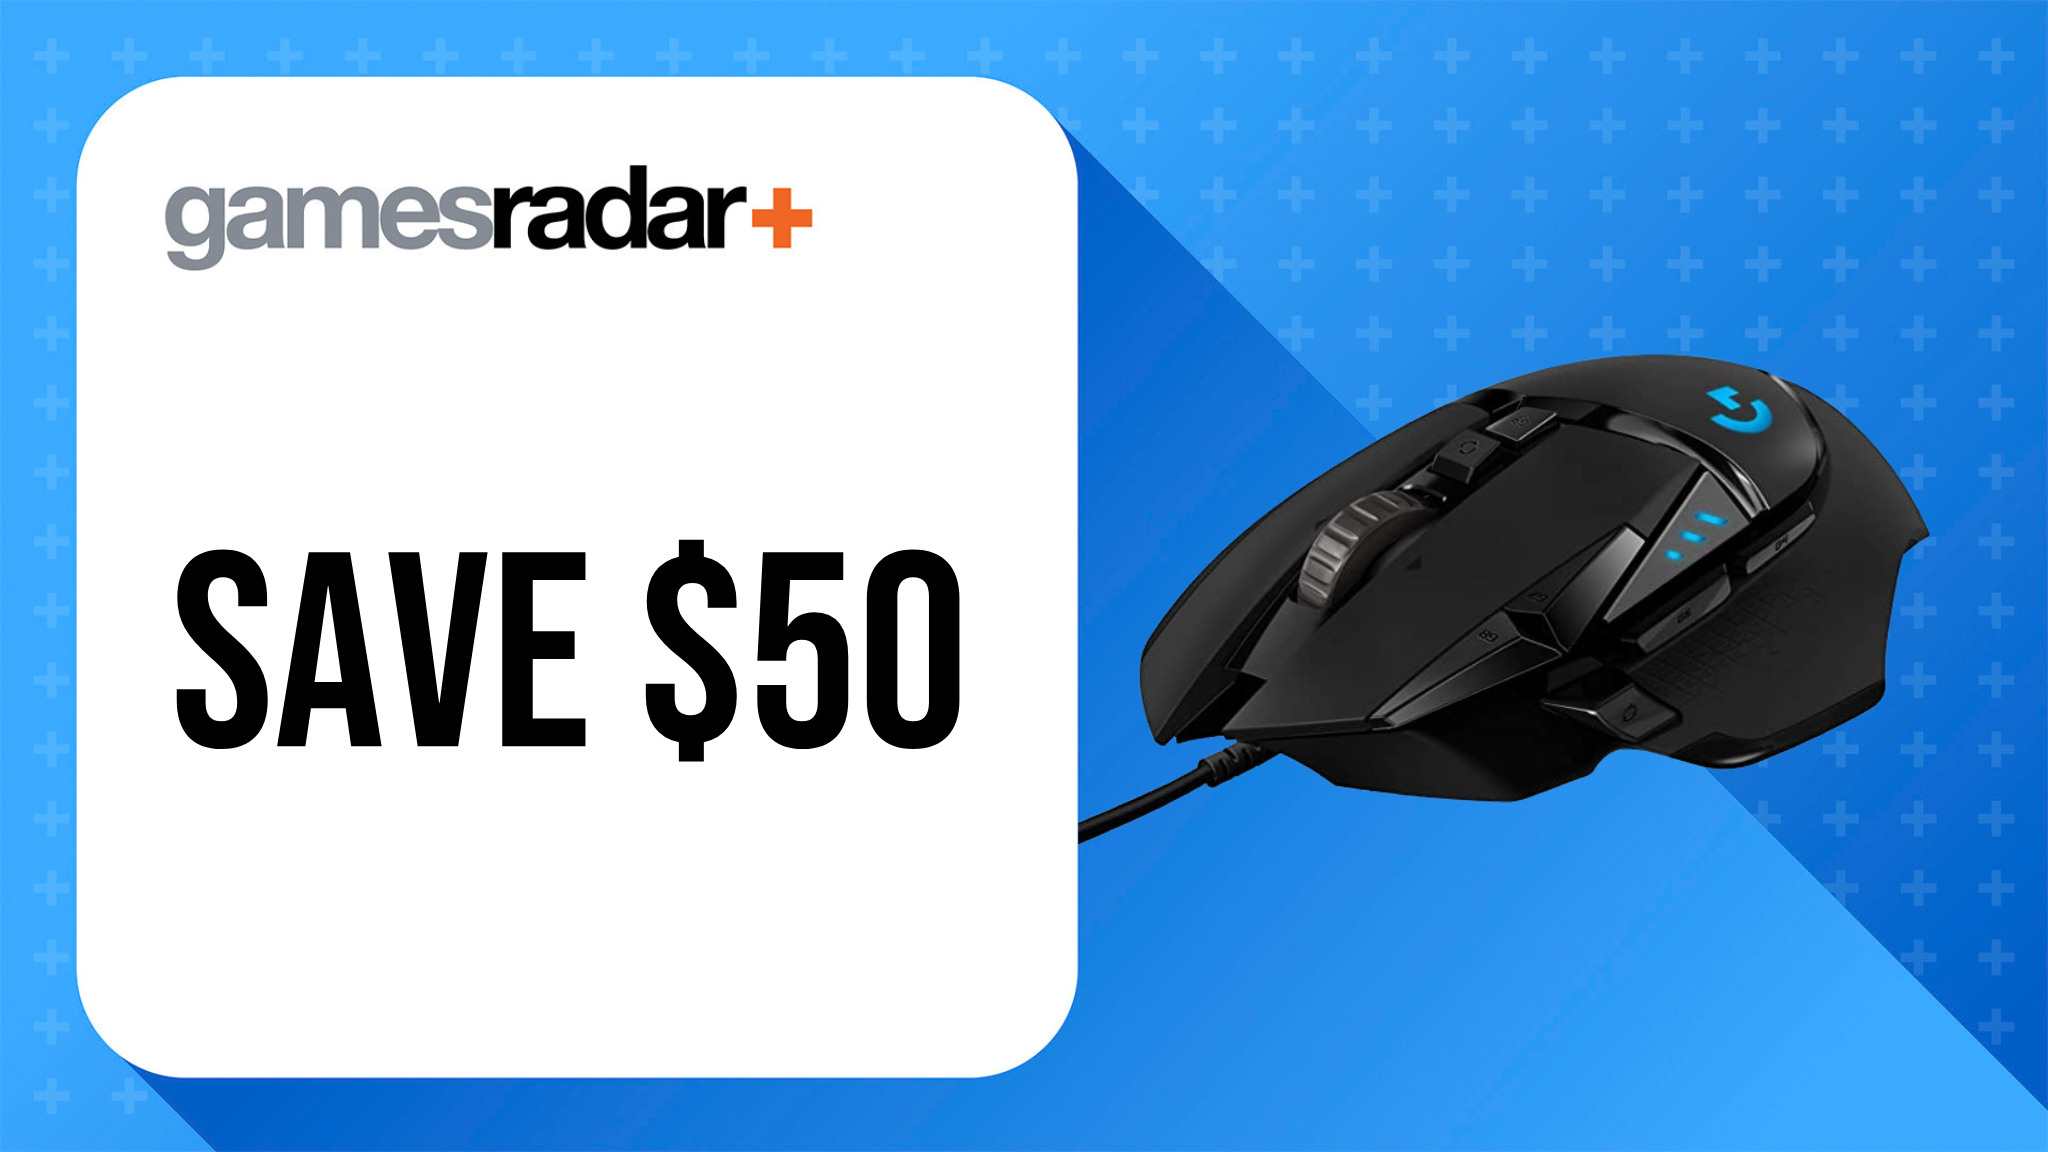 Logitech G502 HERO Gaming Mouse deal image with $50 saving and blue background